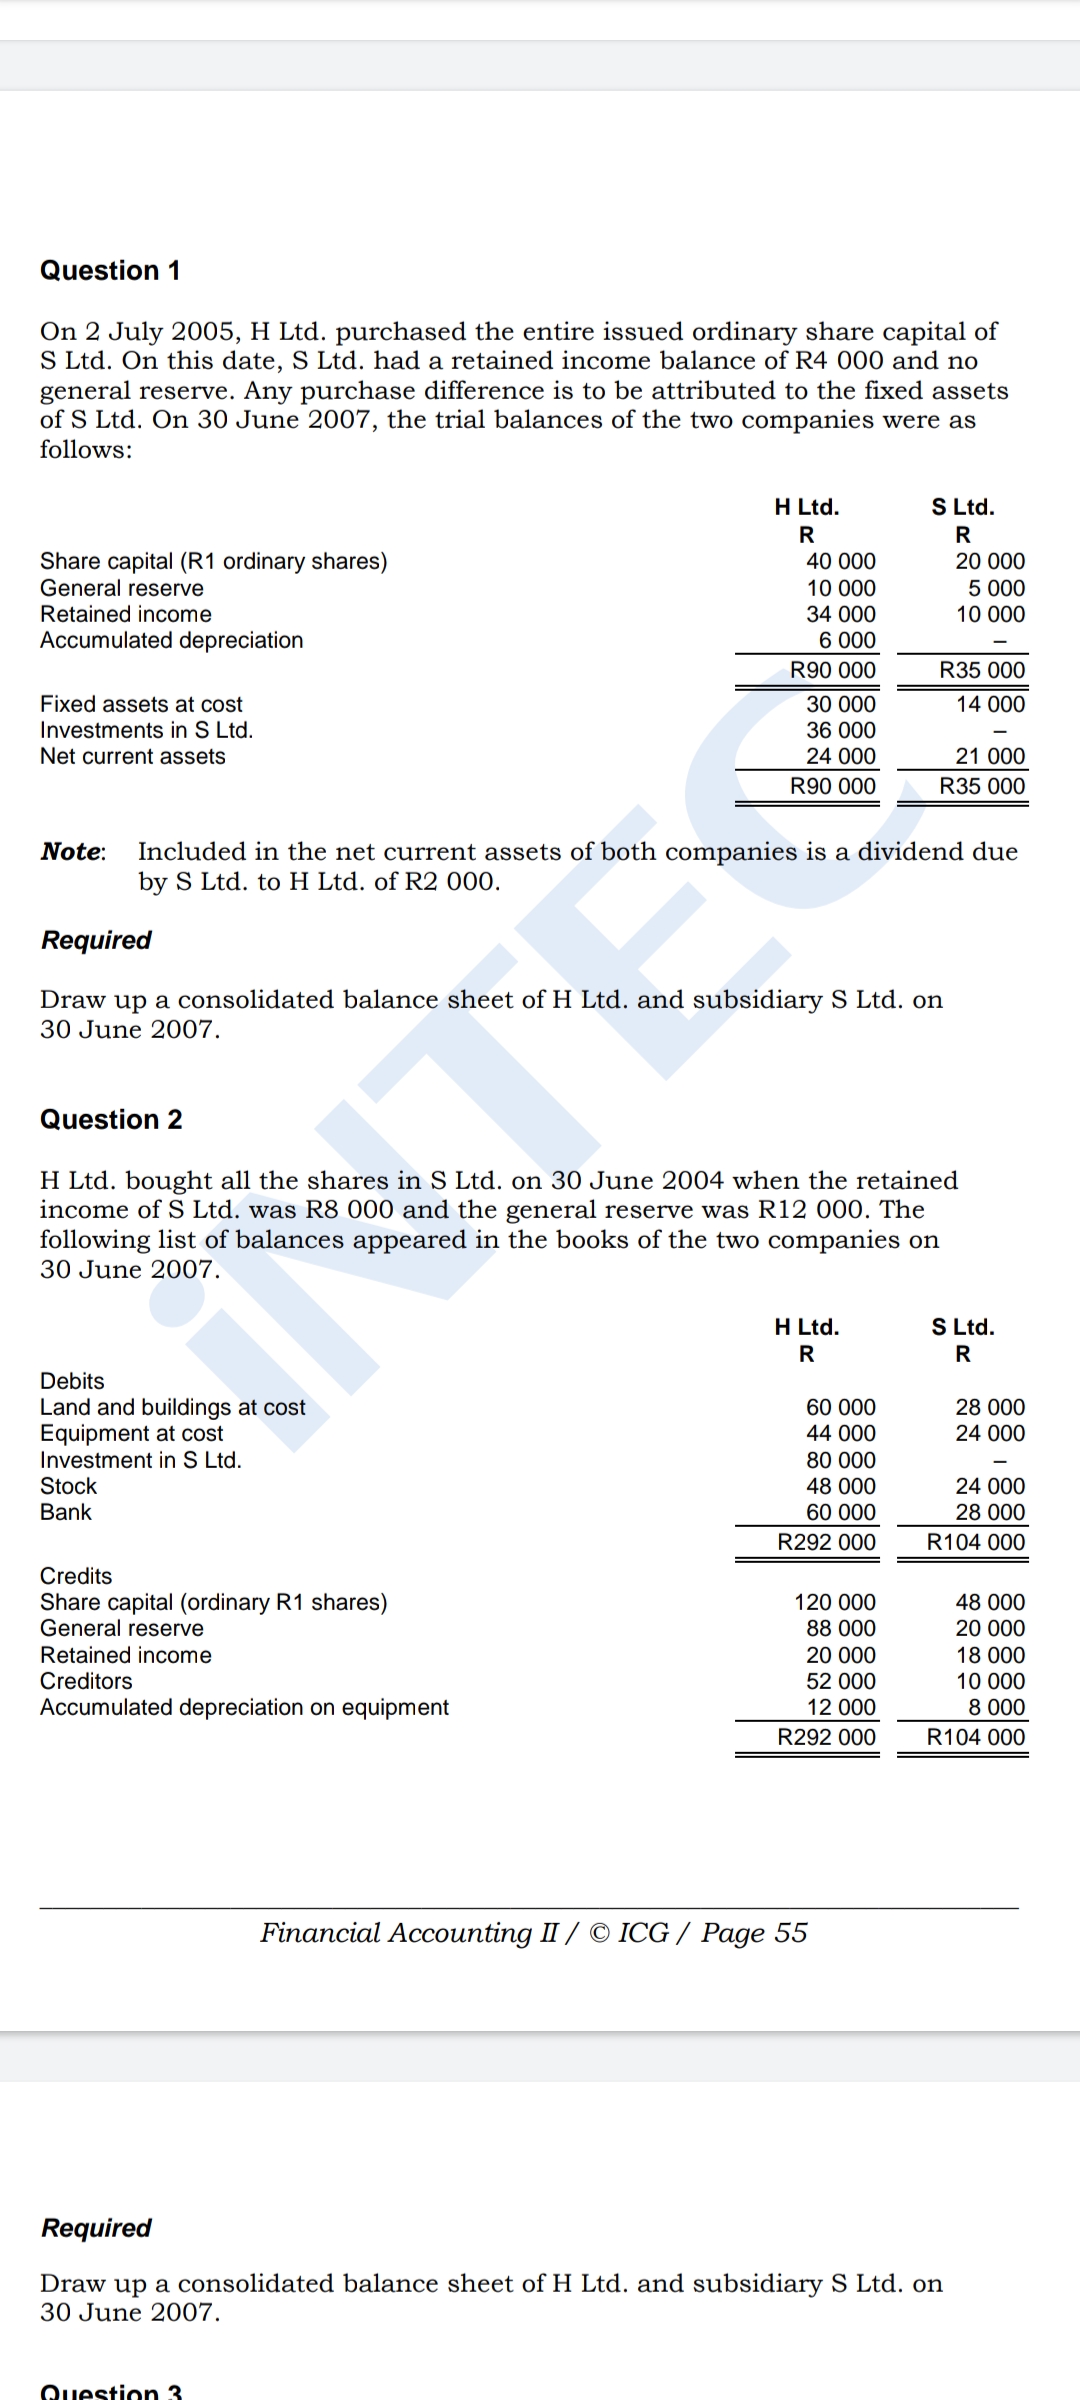 Question 1
On 2 July 2005, H Ltd. purchased the entire issued ordinary share capital of
S Ltd. On this date, S Ltd. had a retained income balance of R4 000 and no
general reserve. Any purchase difference is to be attributed to the fixed assets
of S Ltd. On 30 June 2007, the trial balances of the two companies were as
follows:
H Ltd.
S Ltd.
R
R
Share capital (R1 ordinary shares)
General reserve
Retained income
Accumulated depreciation
40 000
20 000
10 000
5 000
34 000
10 000
6 000
R90 000
R35 000
Fixed assets at cost
30 000
14 000
Investments in S Ltd.
36 000
Net current assets
24 000
21 000
R90 000
R35 000
Included in the net current assets of both companies is a dividend due
by S Ltd. to H Ltd. of R2 000.
Note:
Required
Draw up a consolidated balance sheet of H Ltd. and subsidiary S Ltd. on
30 June 2007.
Question 2
H Ltd. bought all the shares in S Ltd. on 30 June 2004 when the retained
income of S Ltd. was R8 000 and the general reserve was R12 000. The
following list of balances appeared in the books of the two companies on
30 June 2007.
H Ltd.
S Ltd.
R
R
Debits
Land and buildings at cost
Equipment at cost
Investment in S Ltd.
Stock
60 000
28 000
44 000
24 000
80 000
48 000
24 000
Bank
60 000
28 000
R292 000
R104 000
Credits
Share capital (ordinary R1 shares)
General reserve
Retained income
Creditors
Accumulated depreciation on equipment
120 000
48 000
88 000
20 000
20 000
18 000
52 000
10 000
12 000
8 000
R292 000
R104 000
Financial Accounting II / © ICG / Page 55
Required
Draw up a consolidated balance sheet of H Ltd. and subsidiary S Ltd. on
30 June 2007.
Question 3
